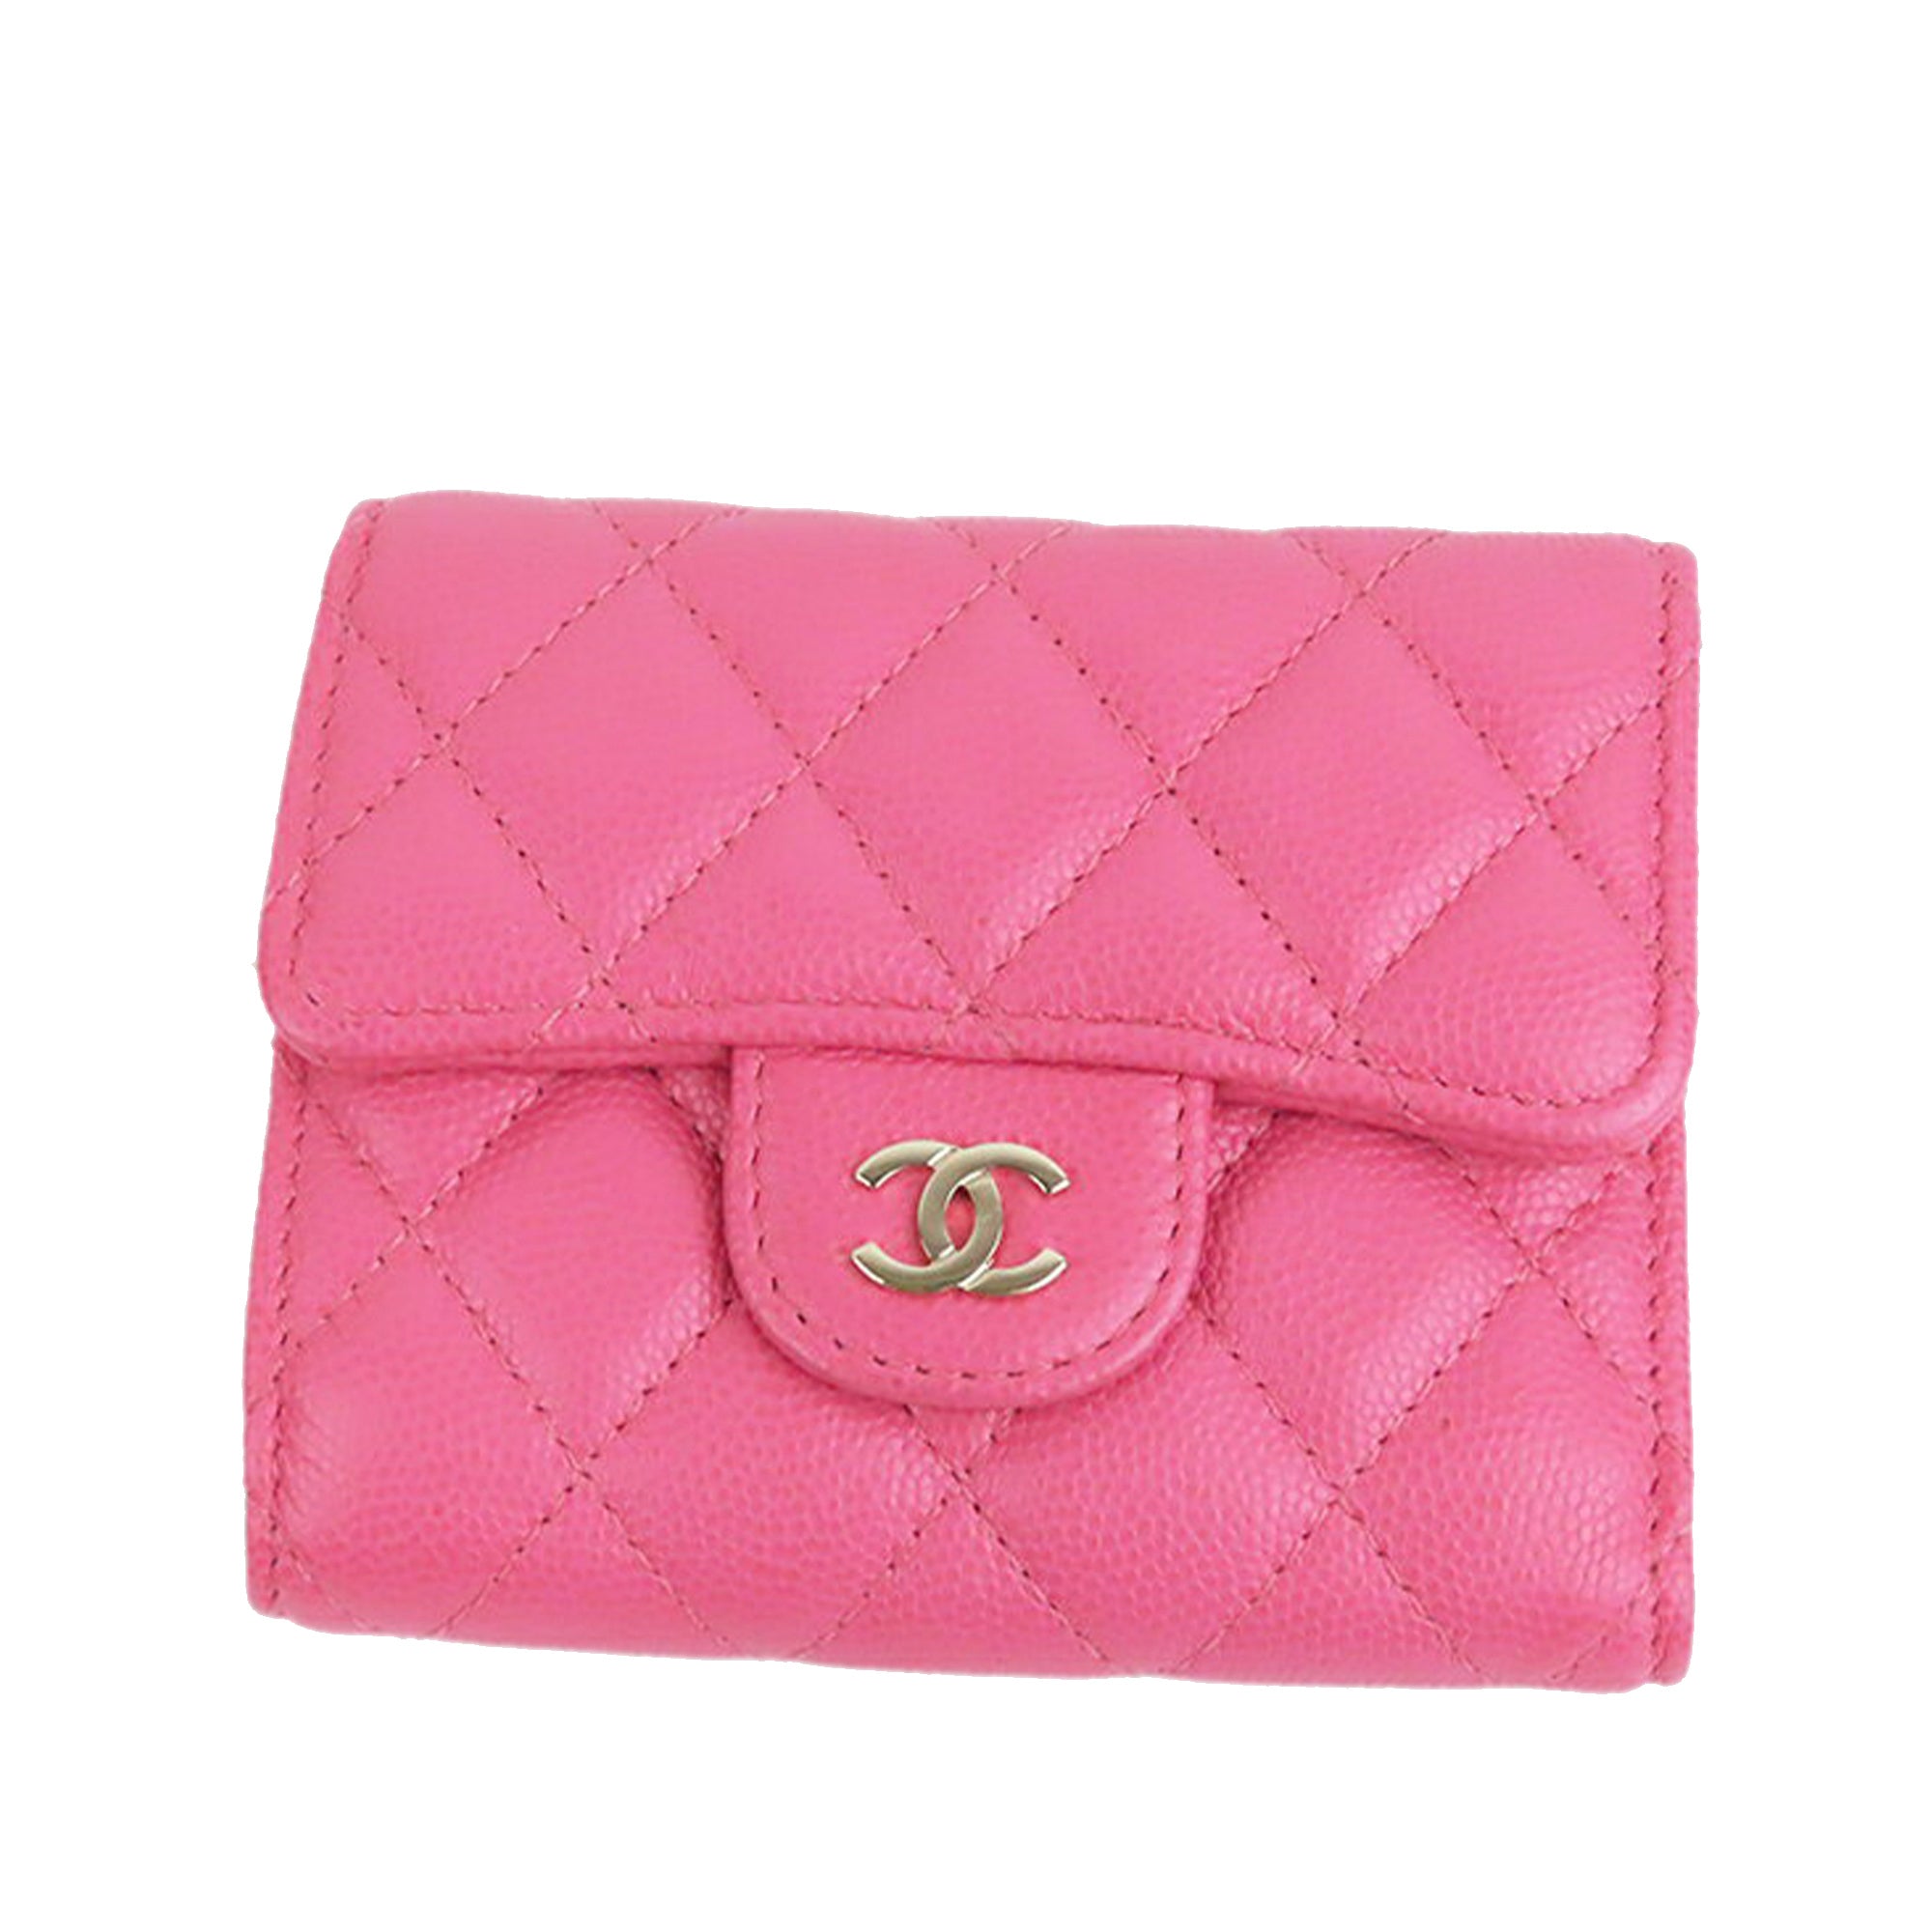 Pink Chanel CC Caviar Leather Wallet, Classic Chanel scarf featuring  interlocking CC and Chanel print throughout